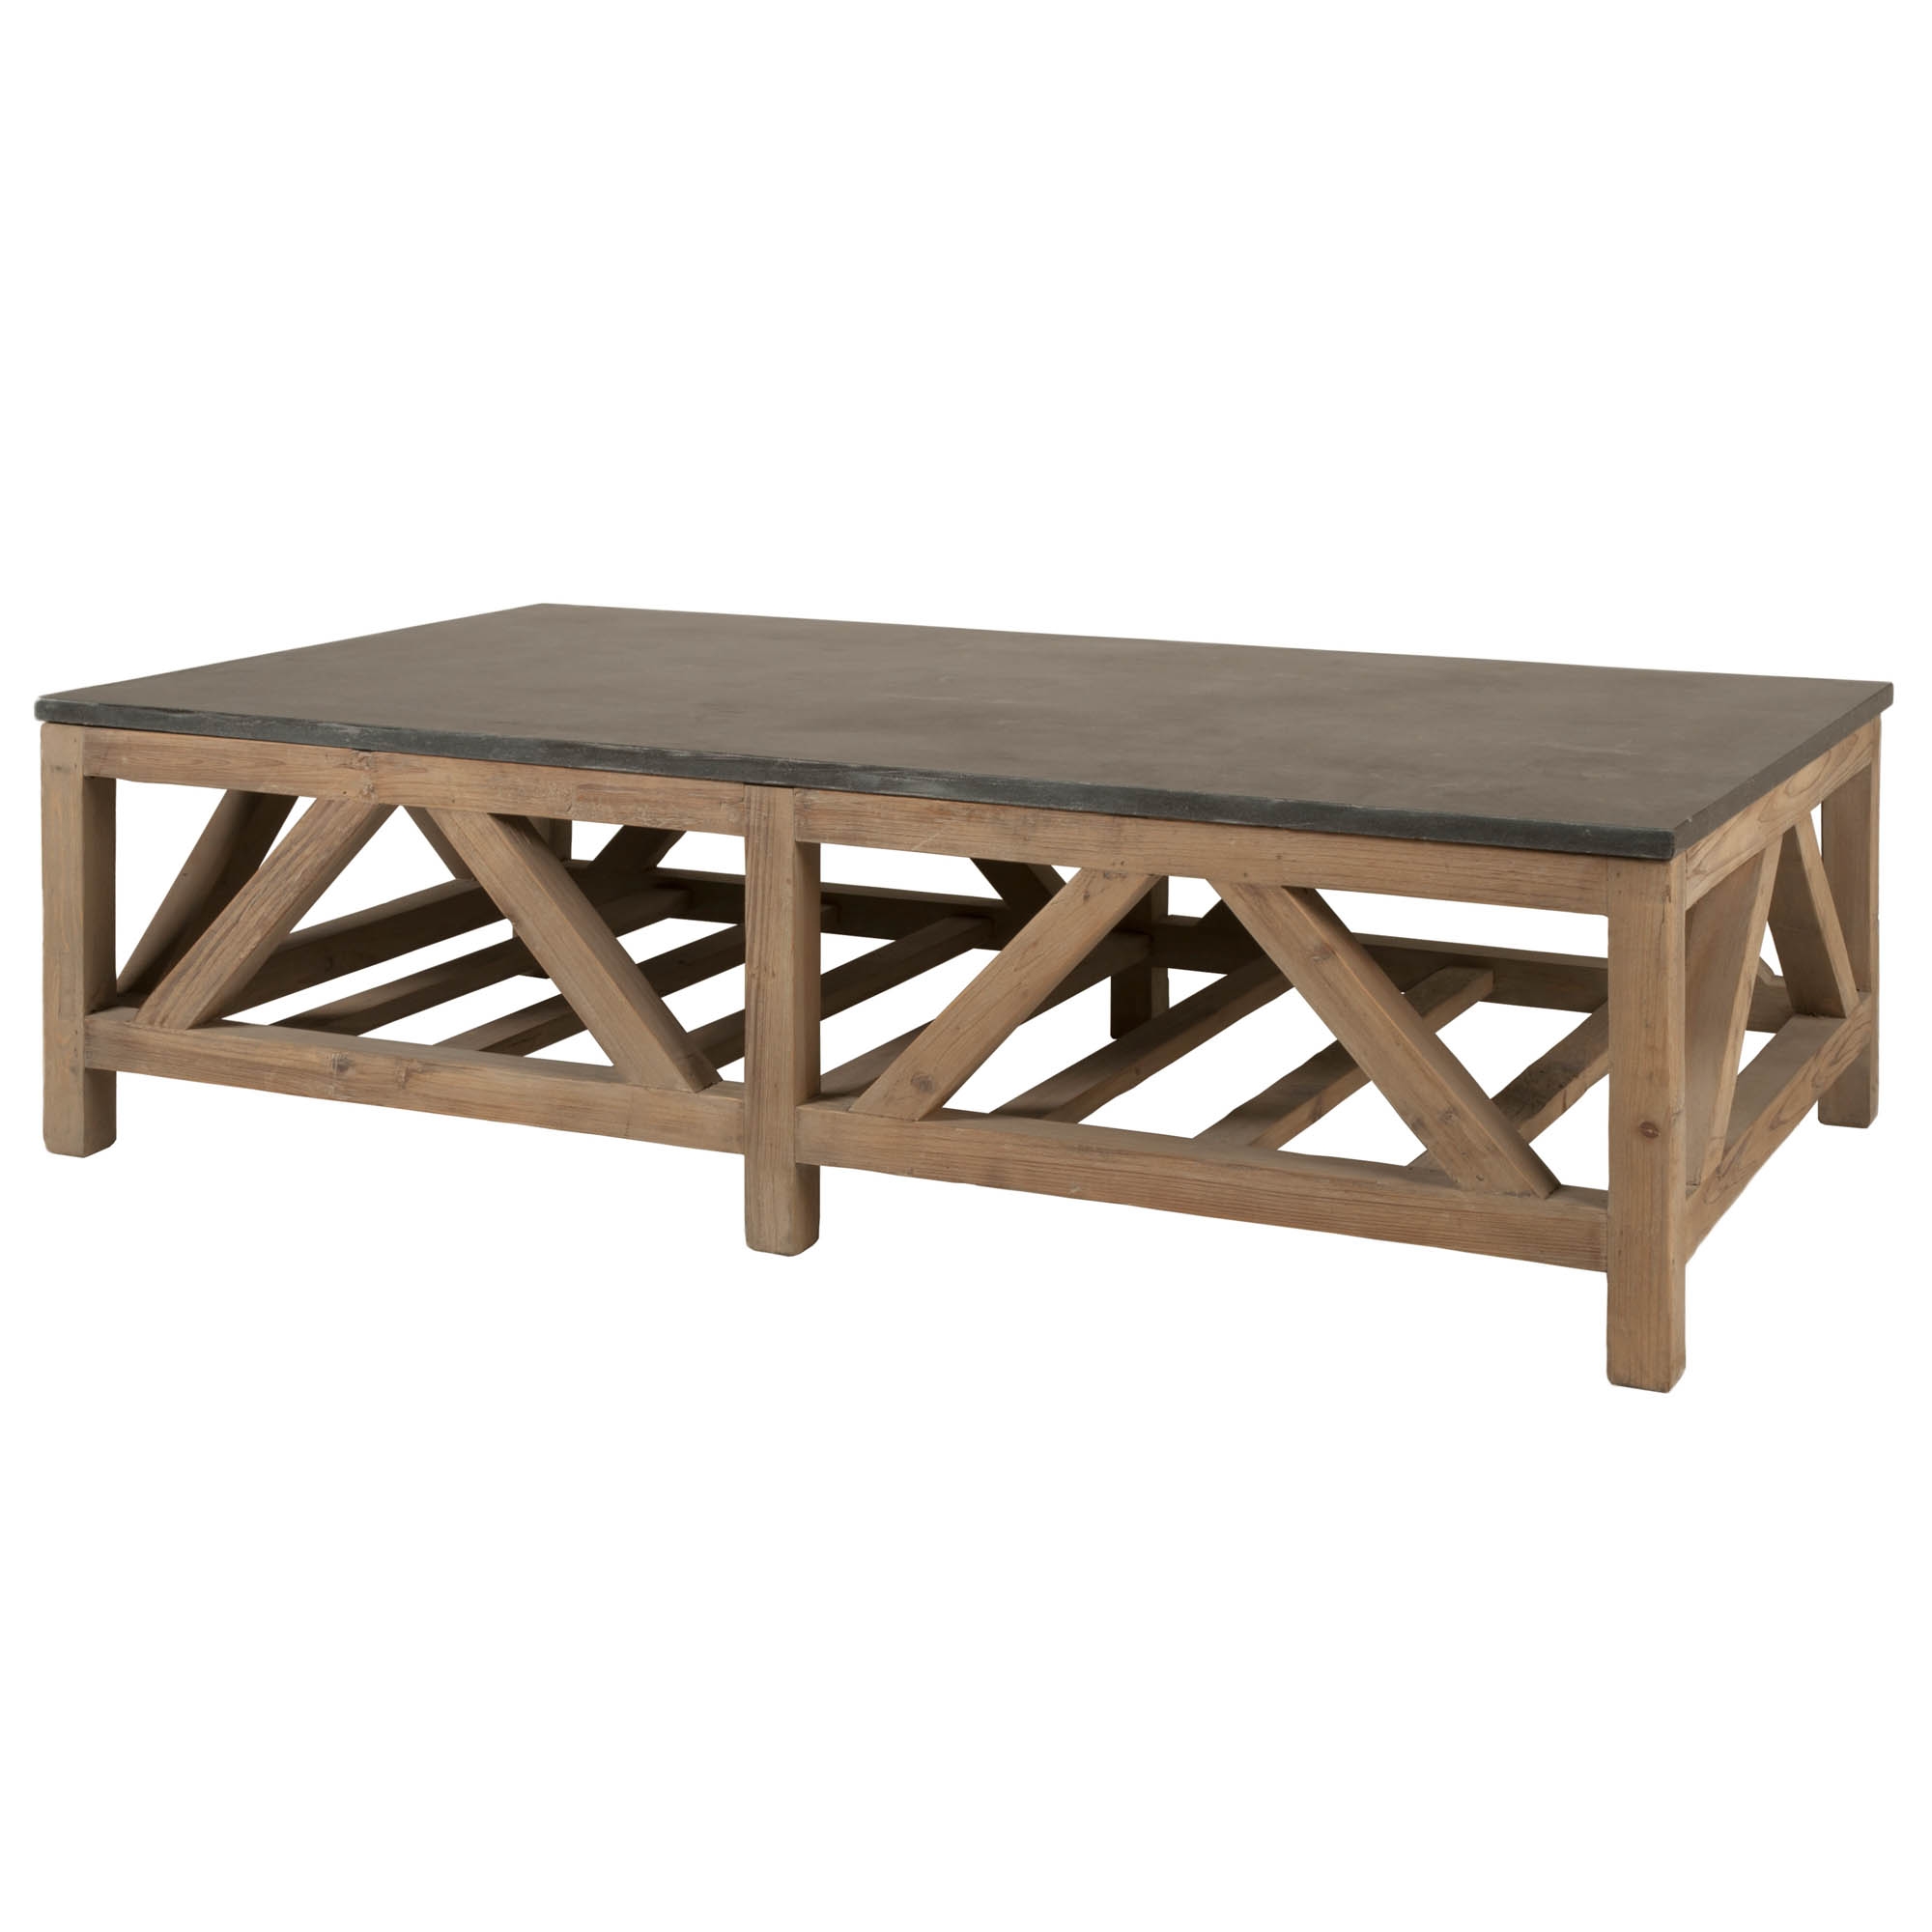 Blue Stone Coffee Table - Image 1